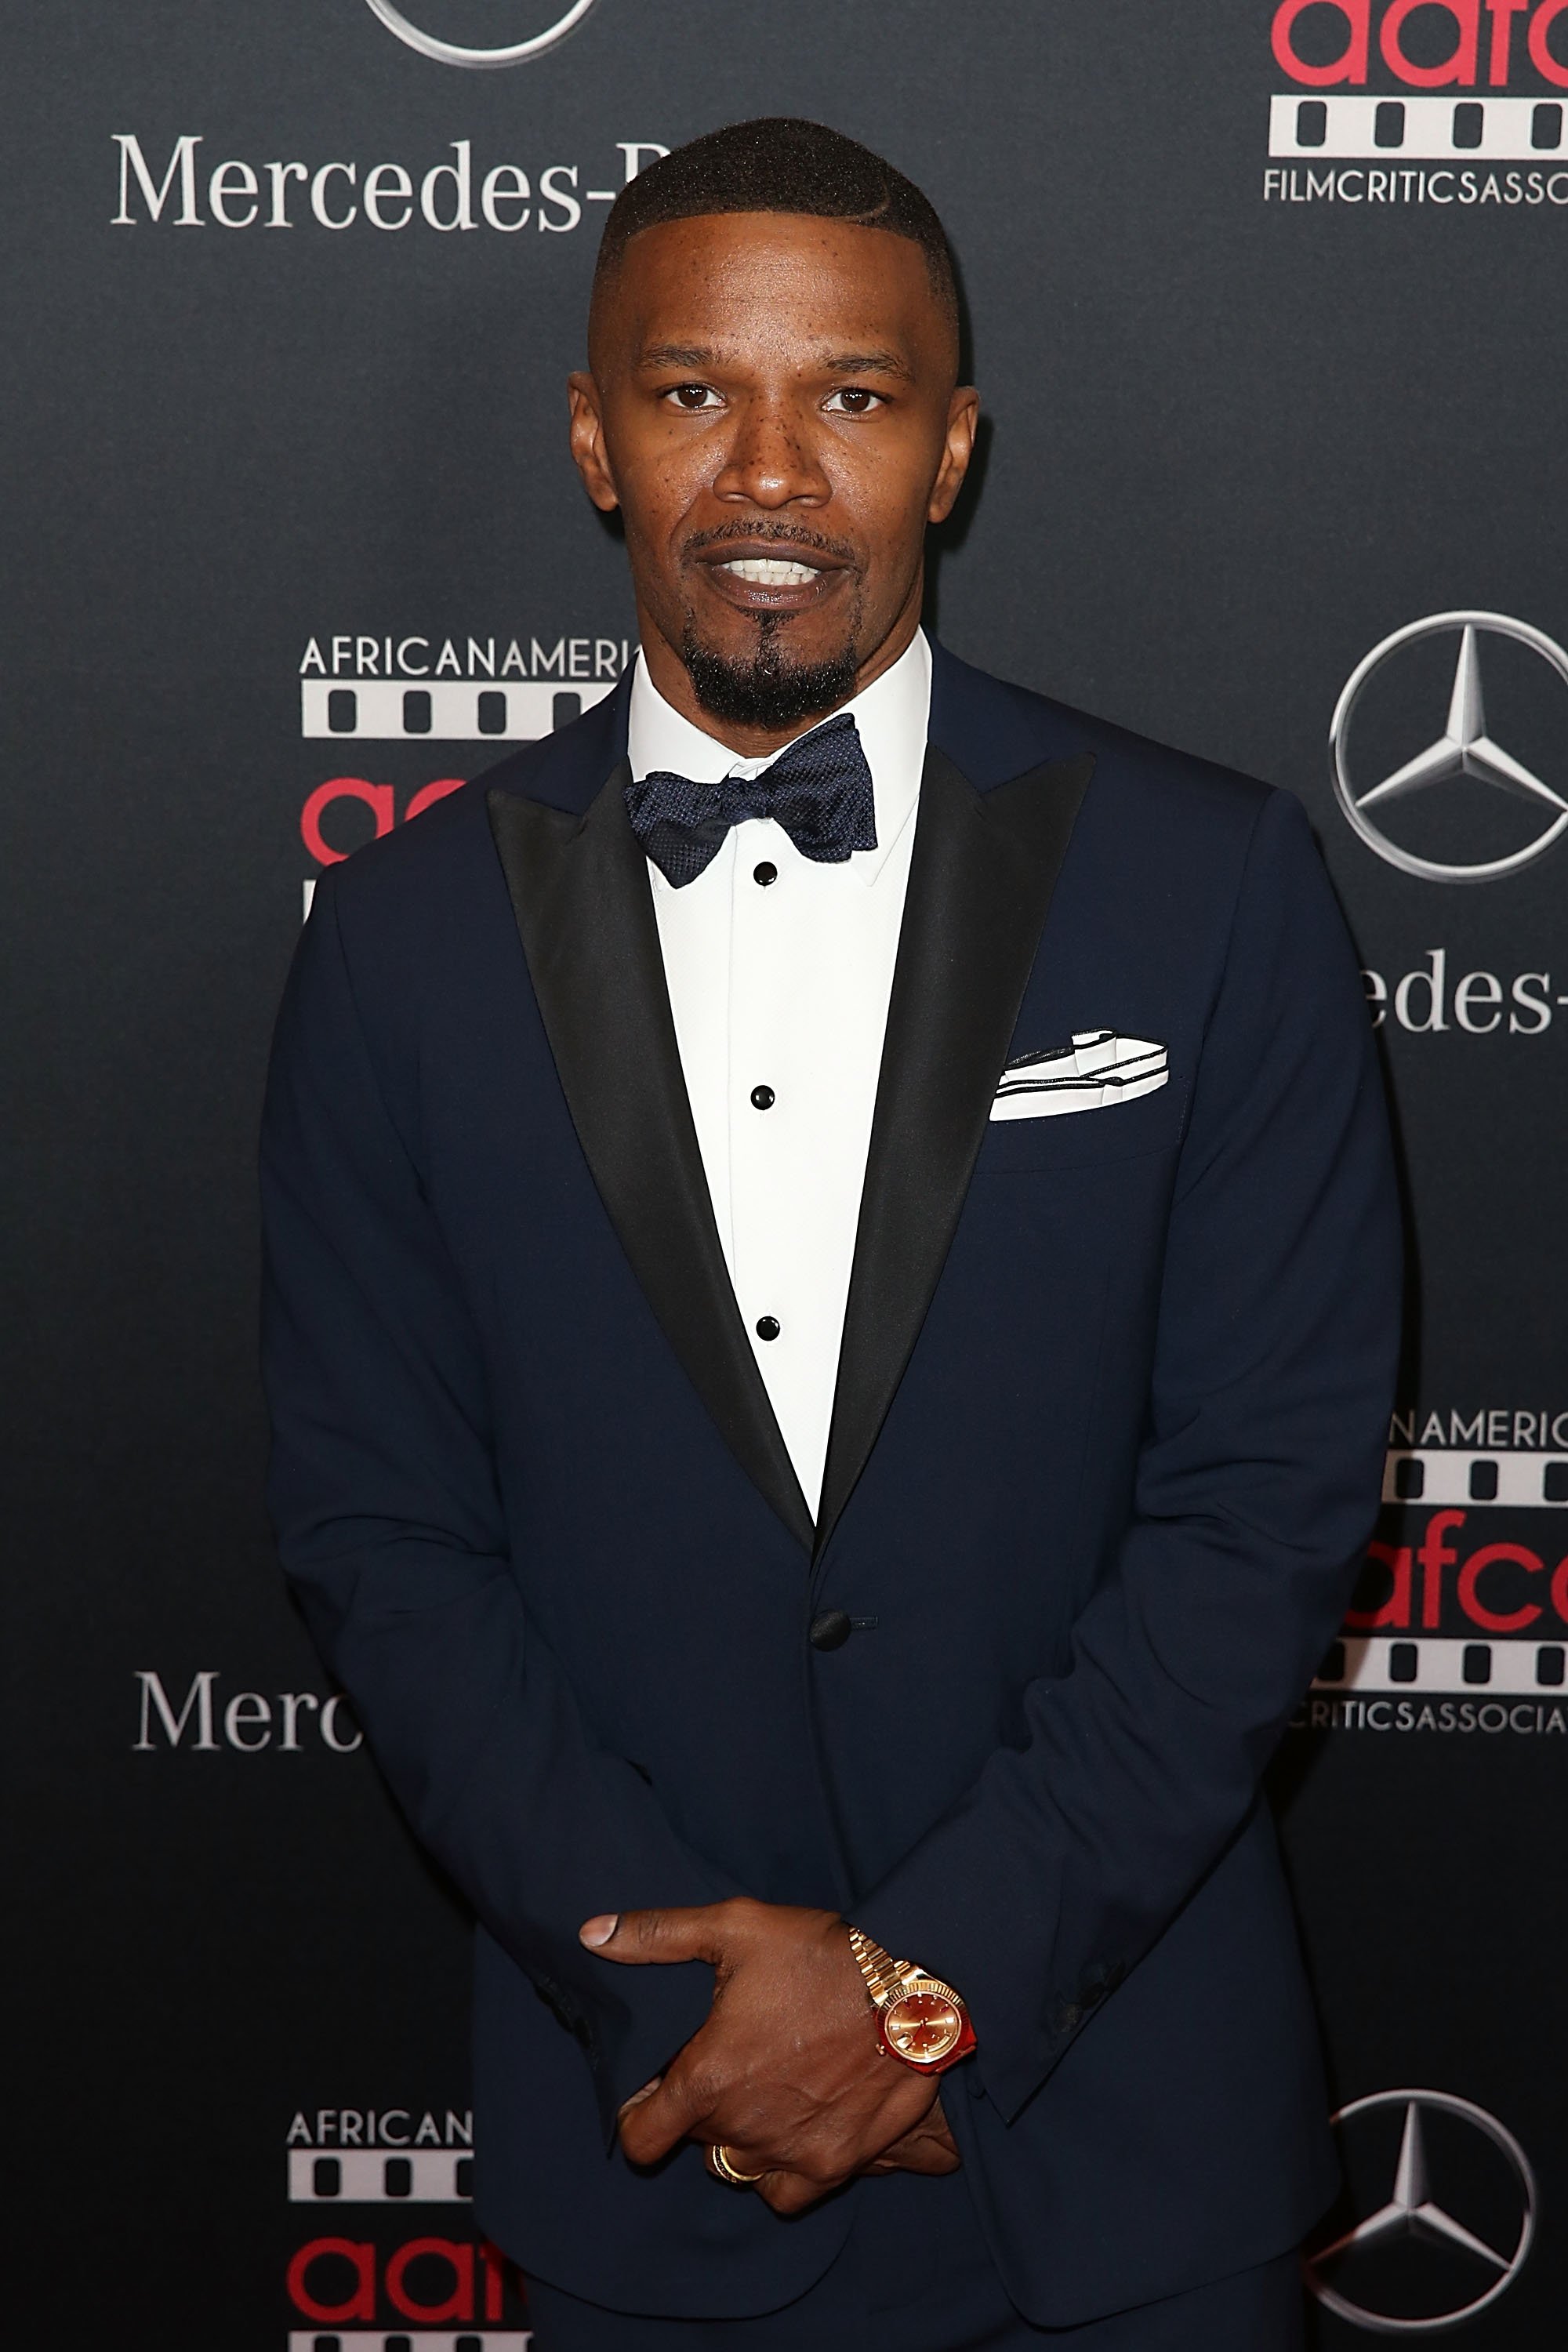 Jamie Foxx attends the African American Film Critics Association Oscar in Los Angeles on February 28, 2016 | Photo: Getty Images